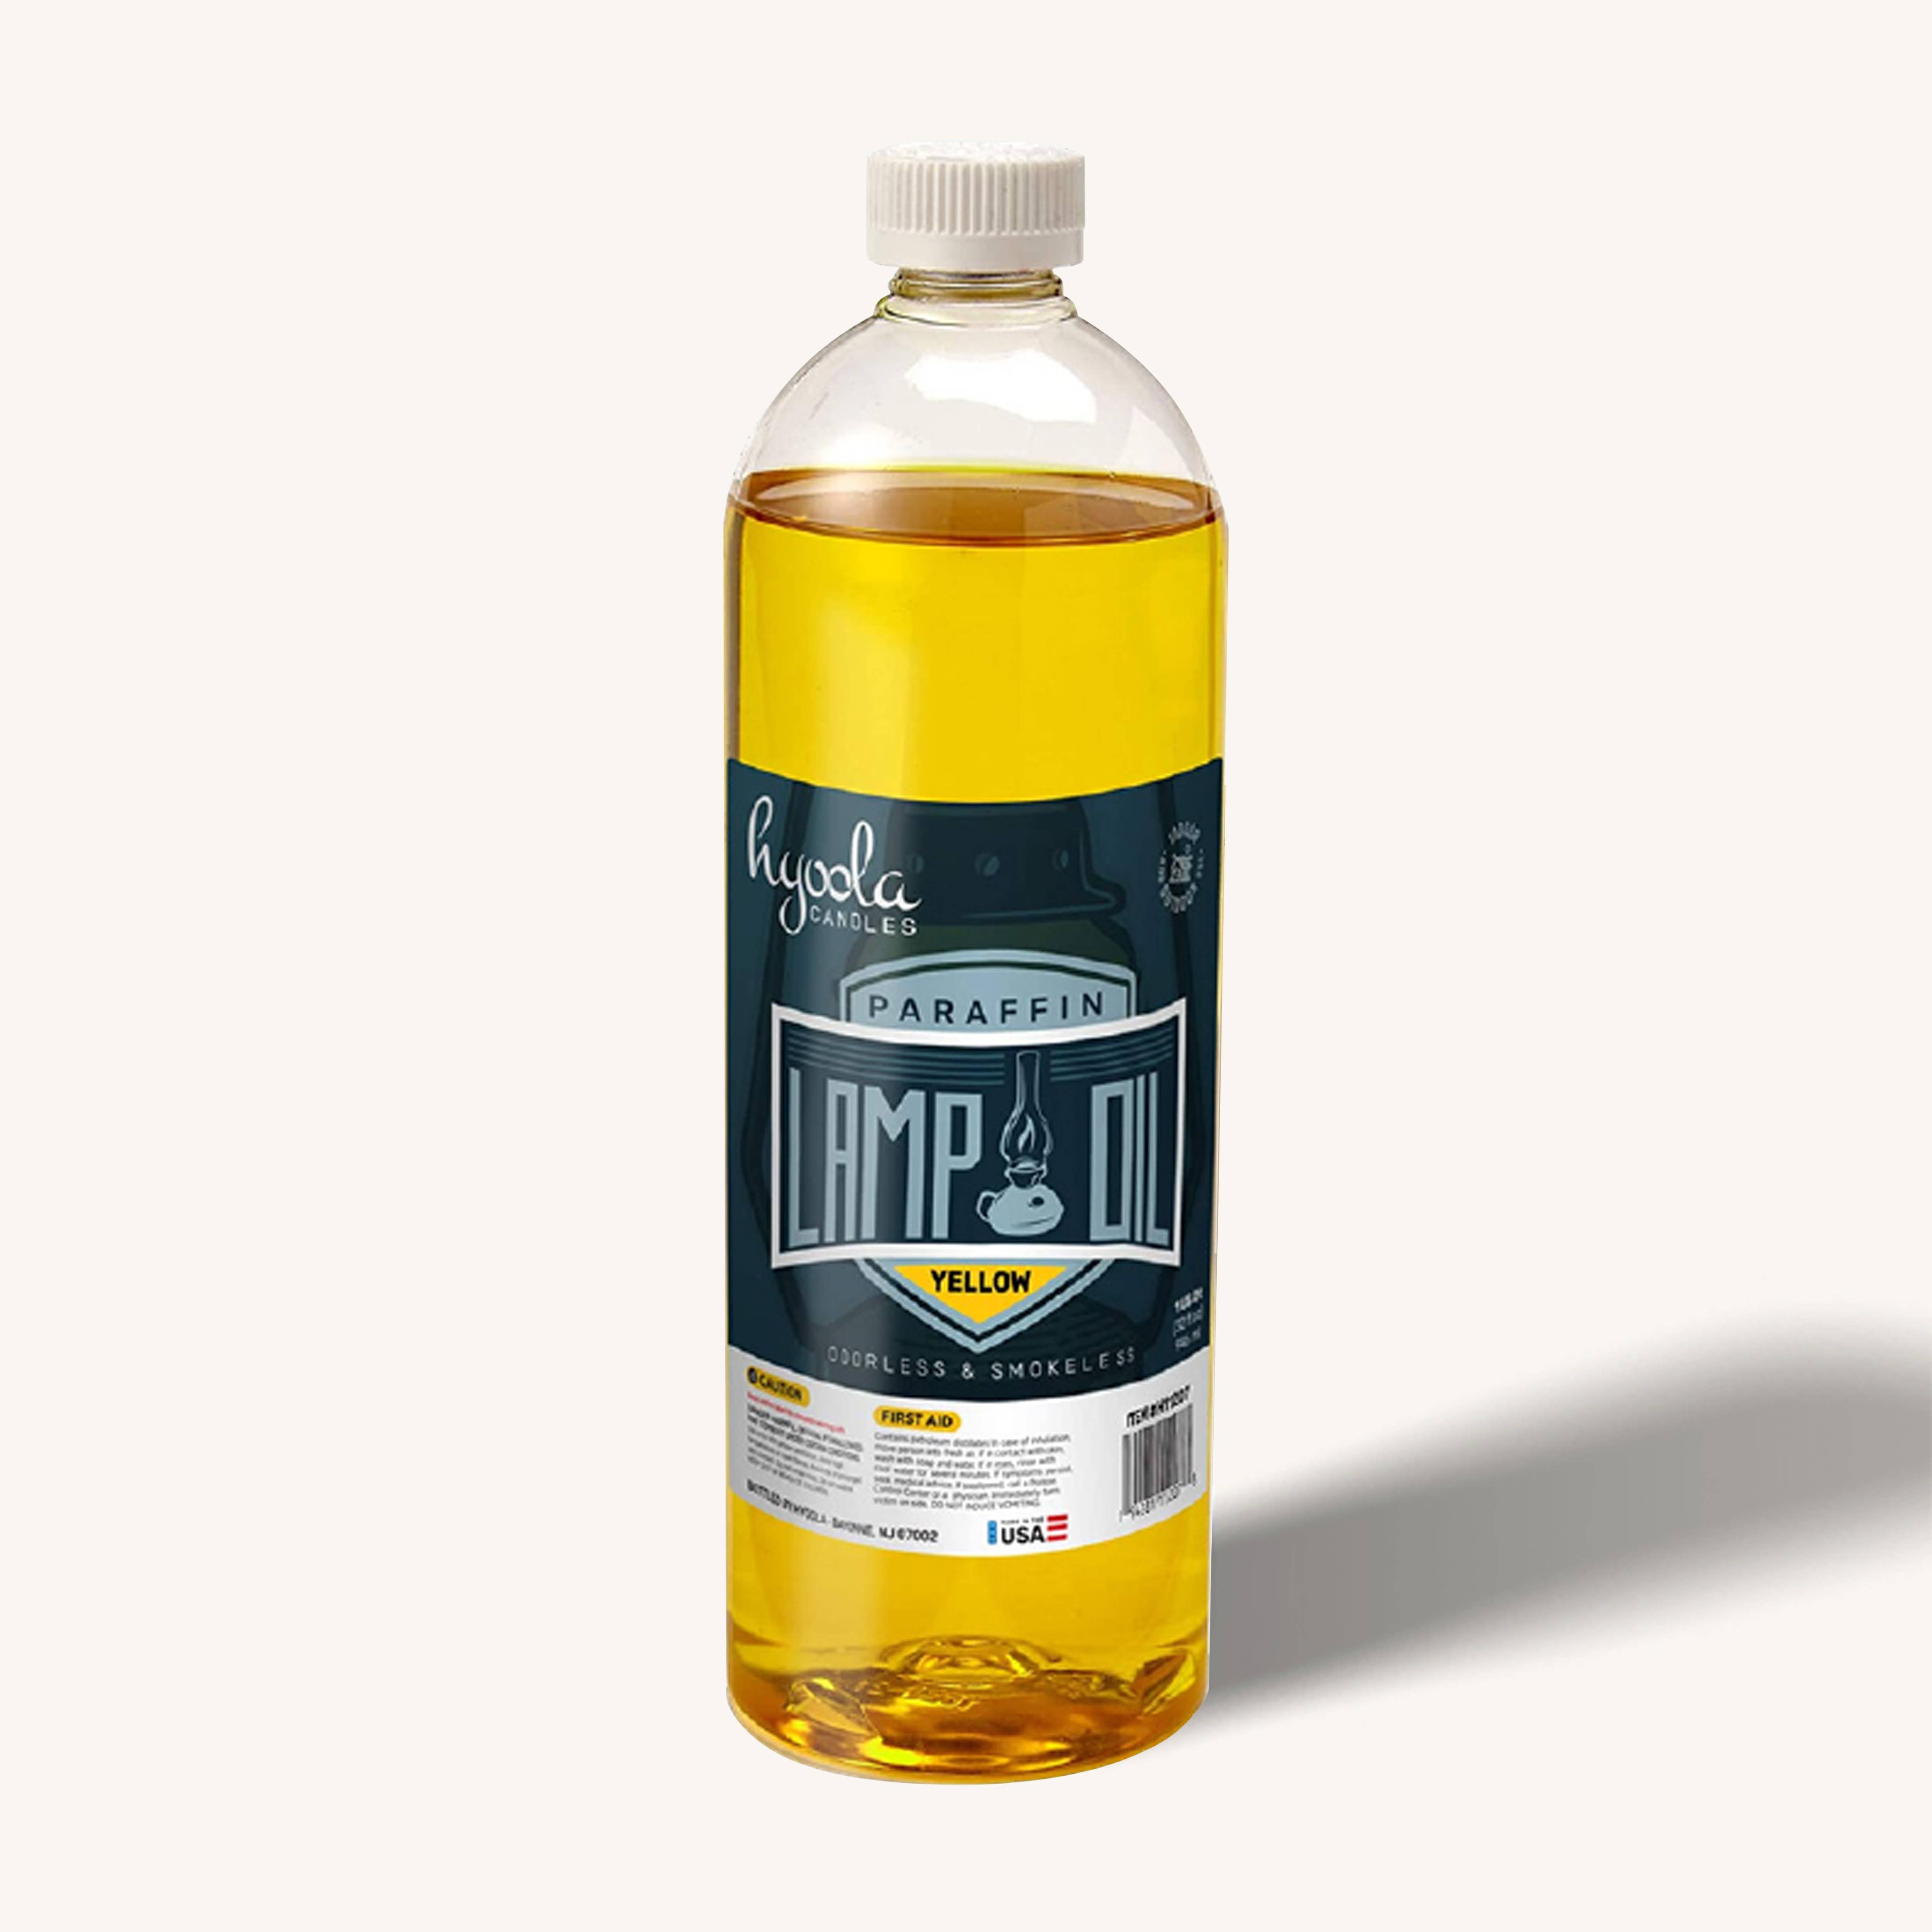 Paraffin Lamp Oil - Yellow - 16 Ounces